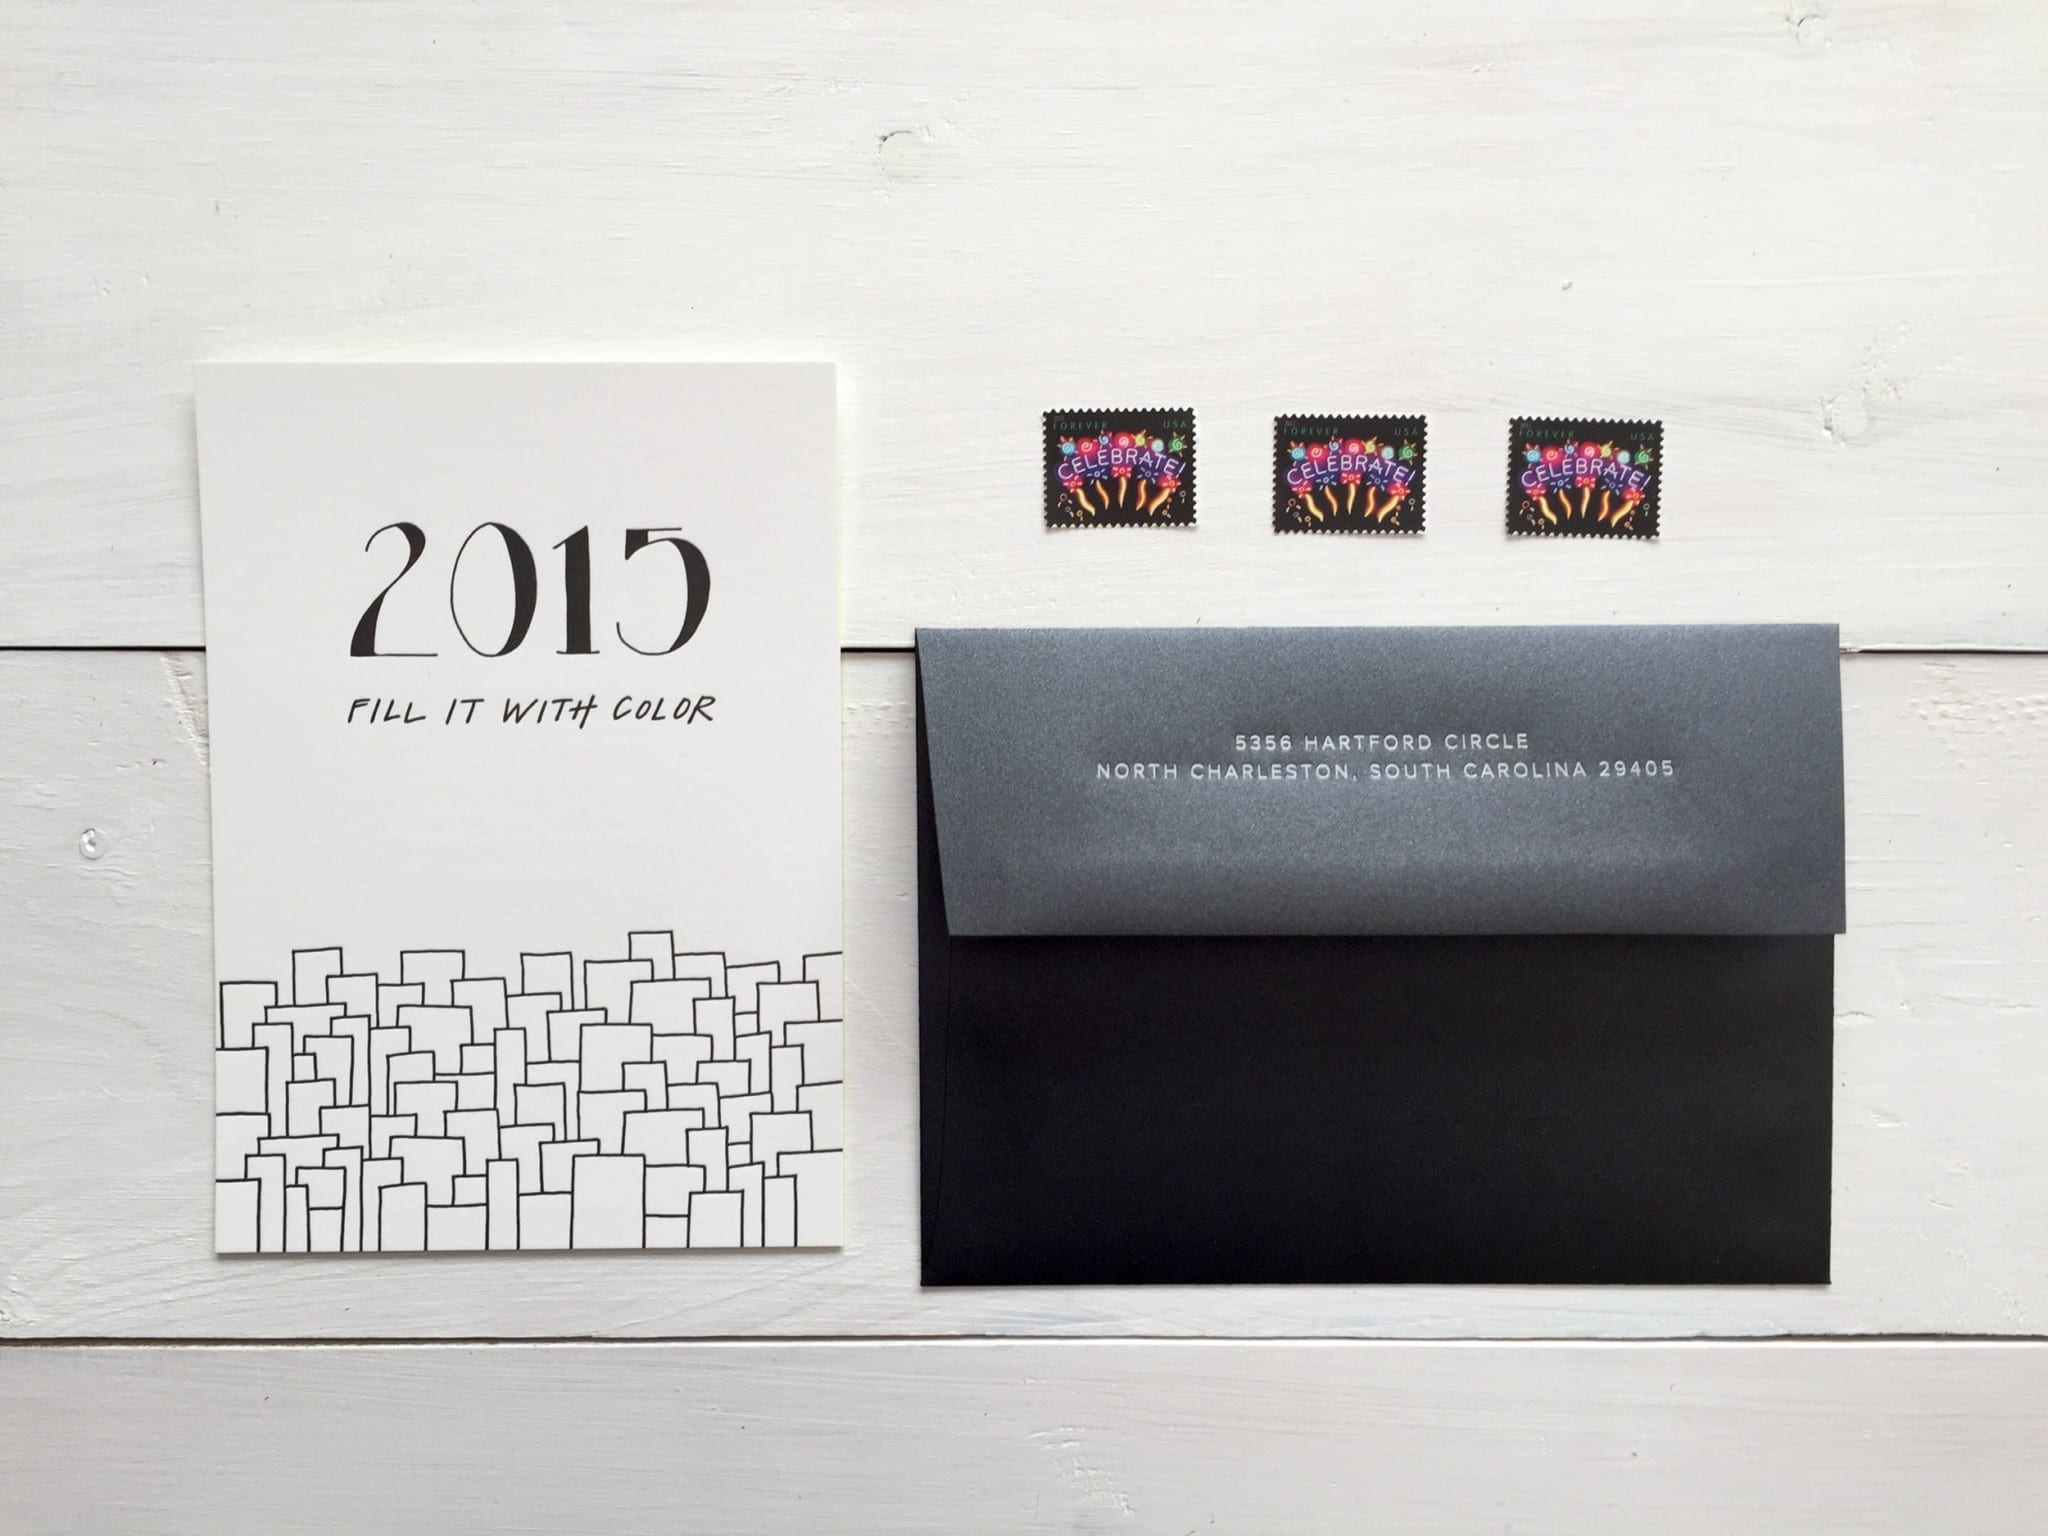 INK MEETS PAPER® New Year's Card for 2015